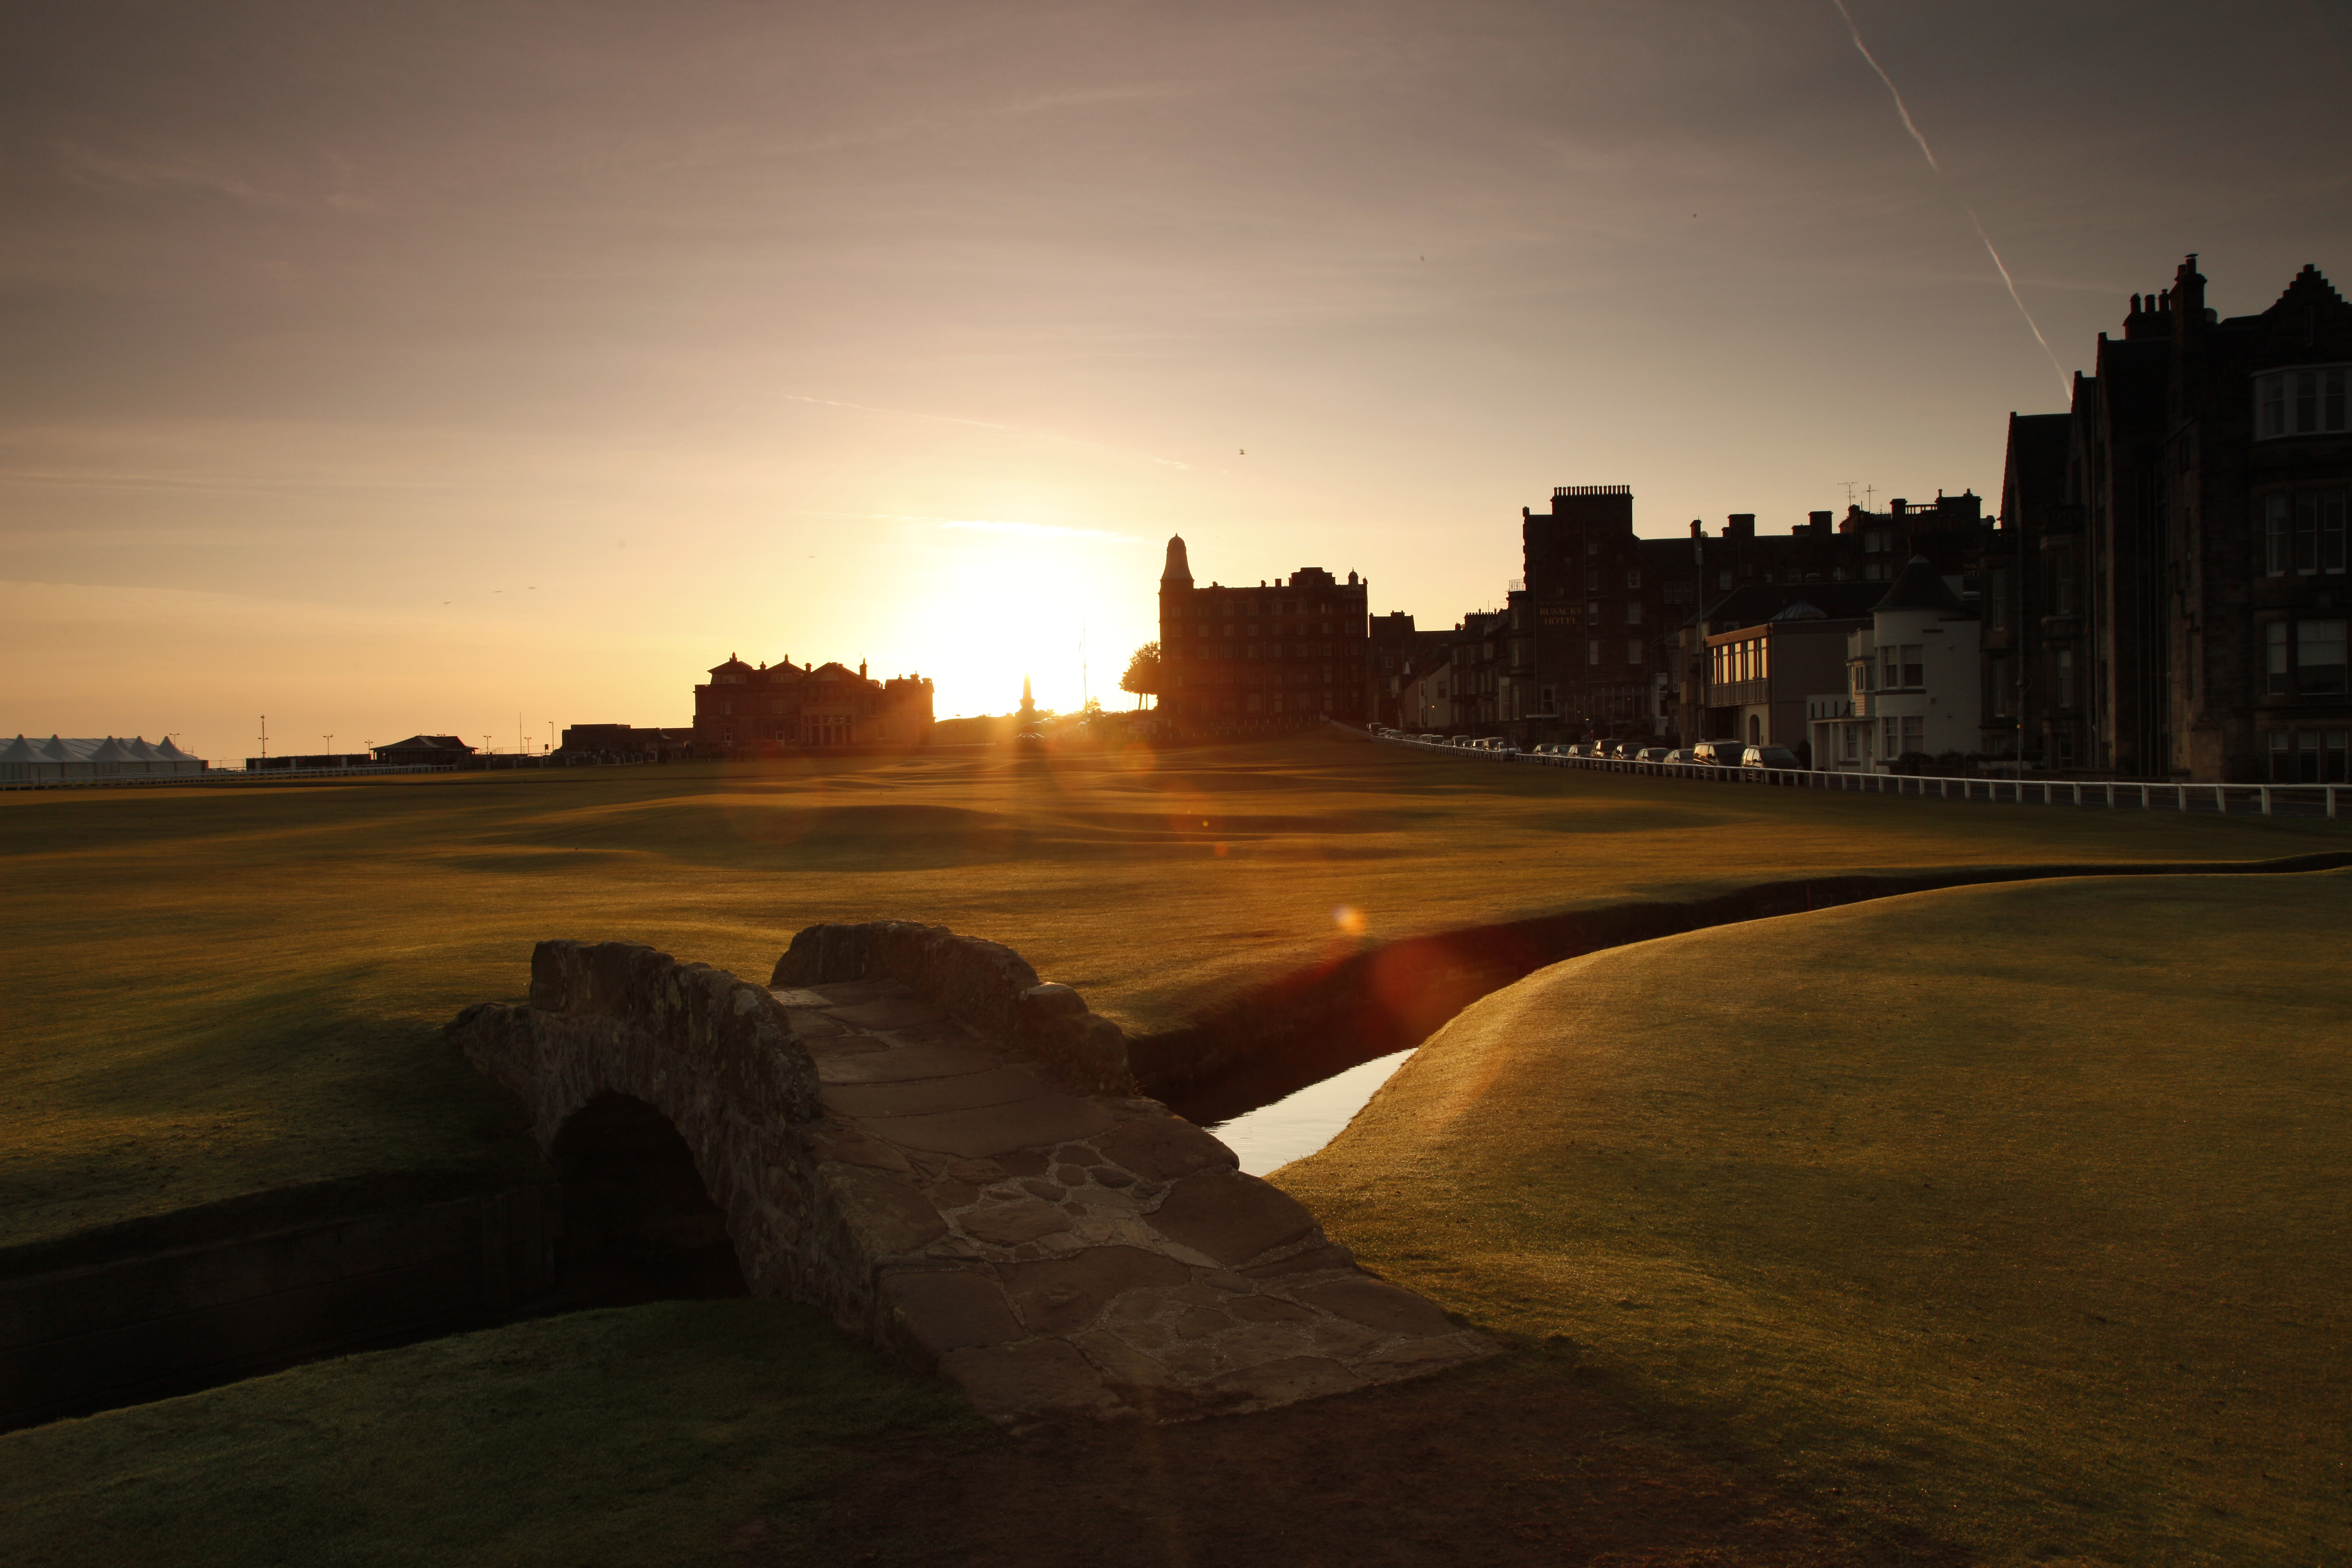 A special day in St Andrews - for Golfers often the best day of their trip